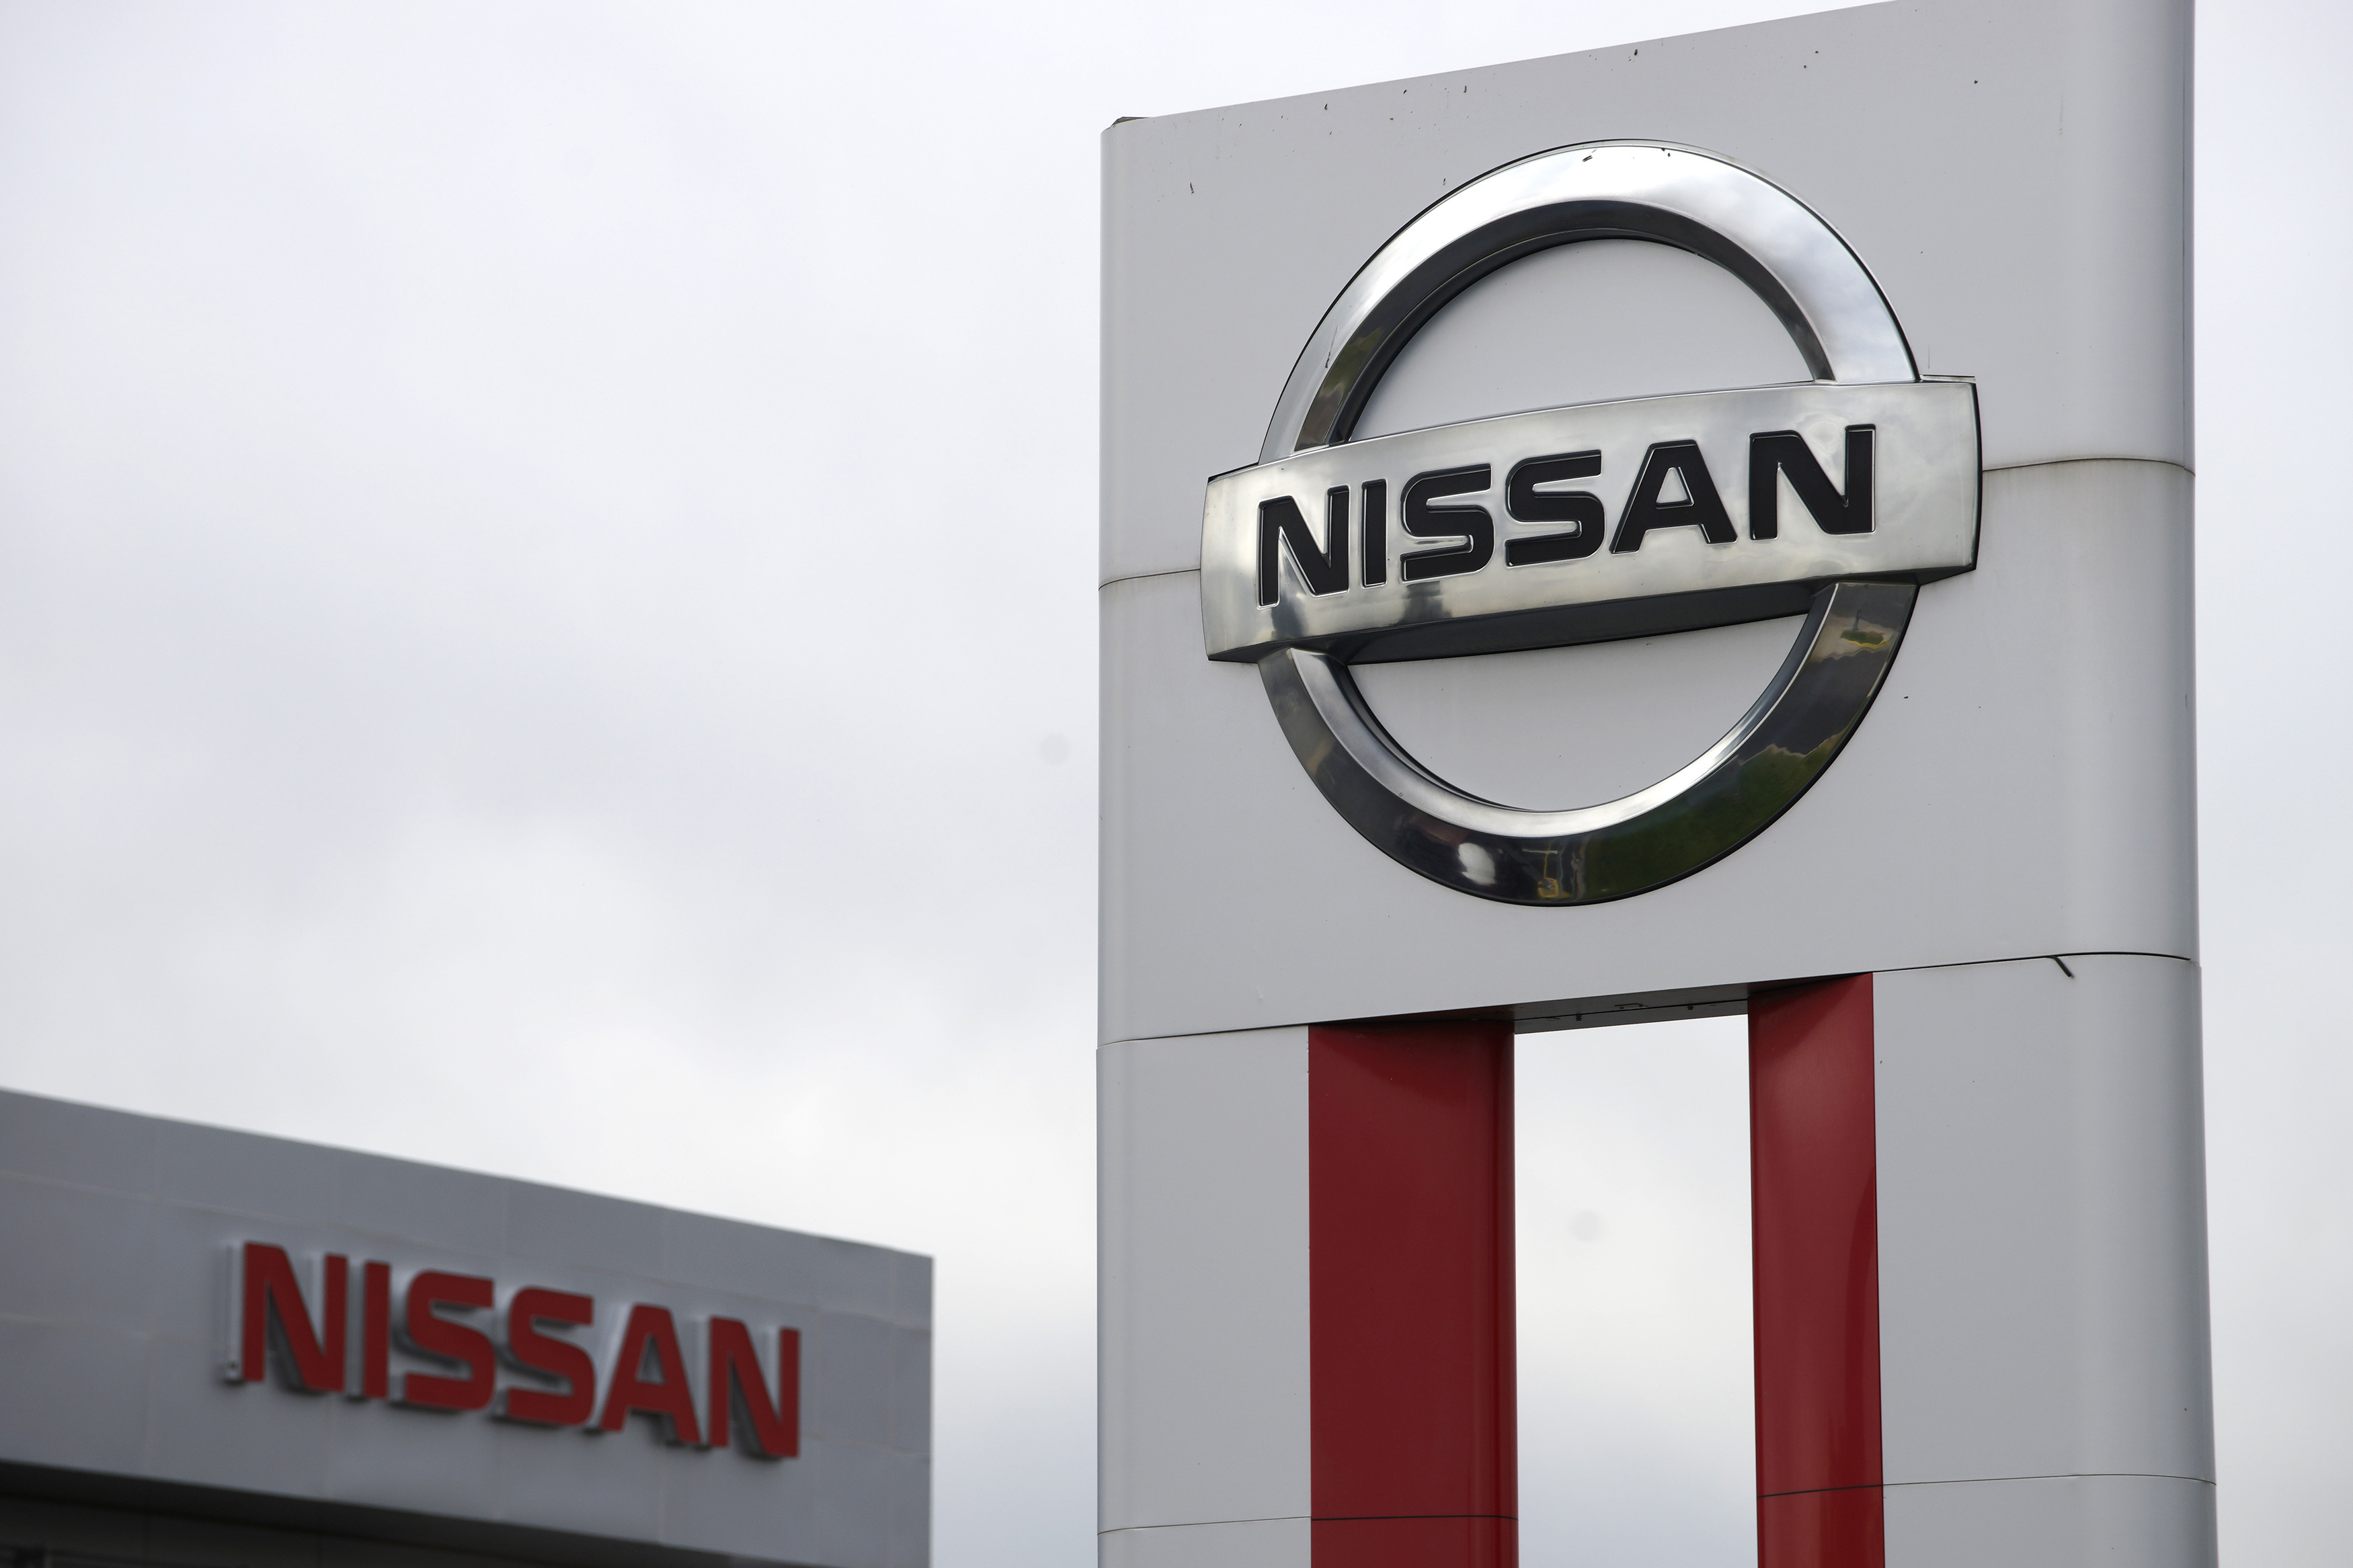 Nissan signs are seen outside a Nissan auto dealer in Broomfield, Colorado